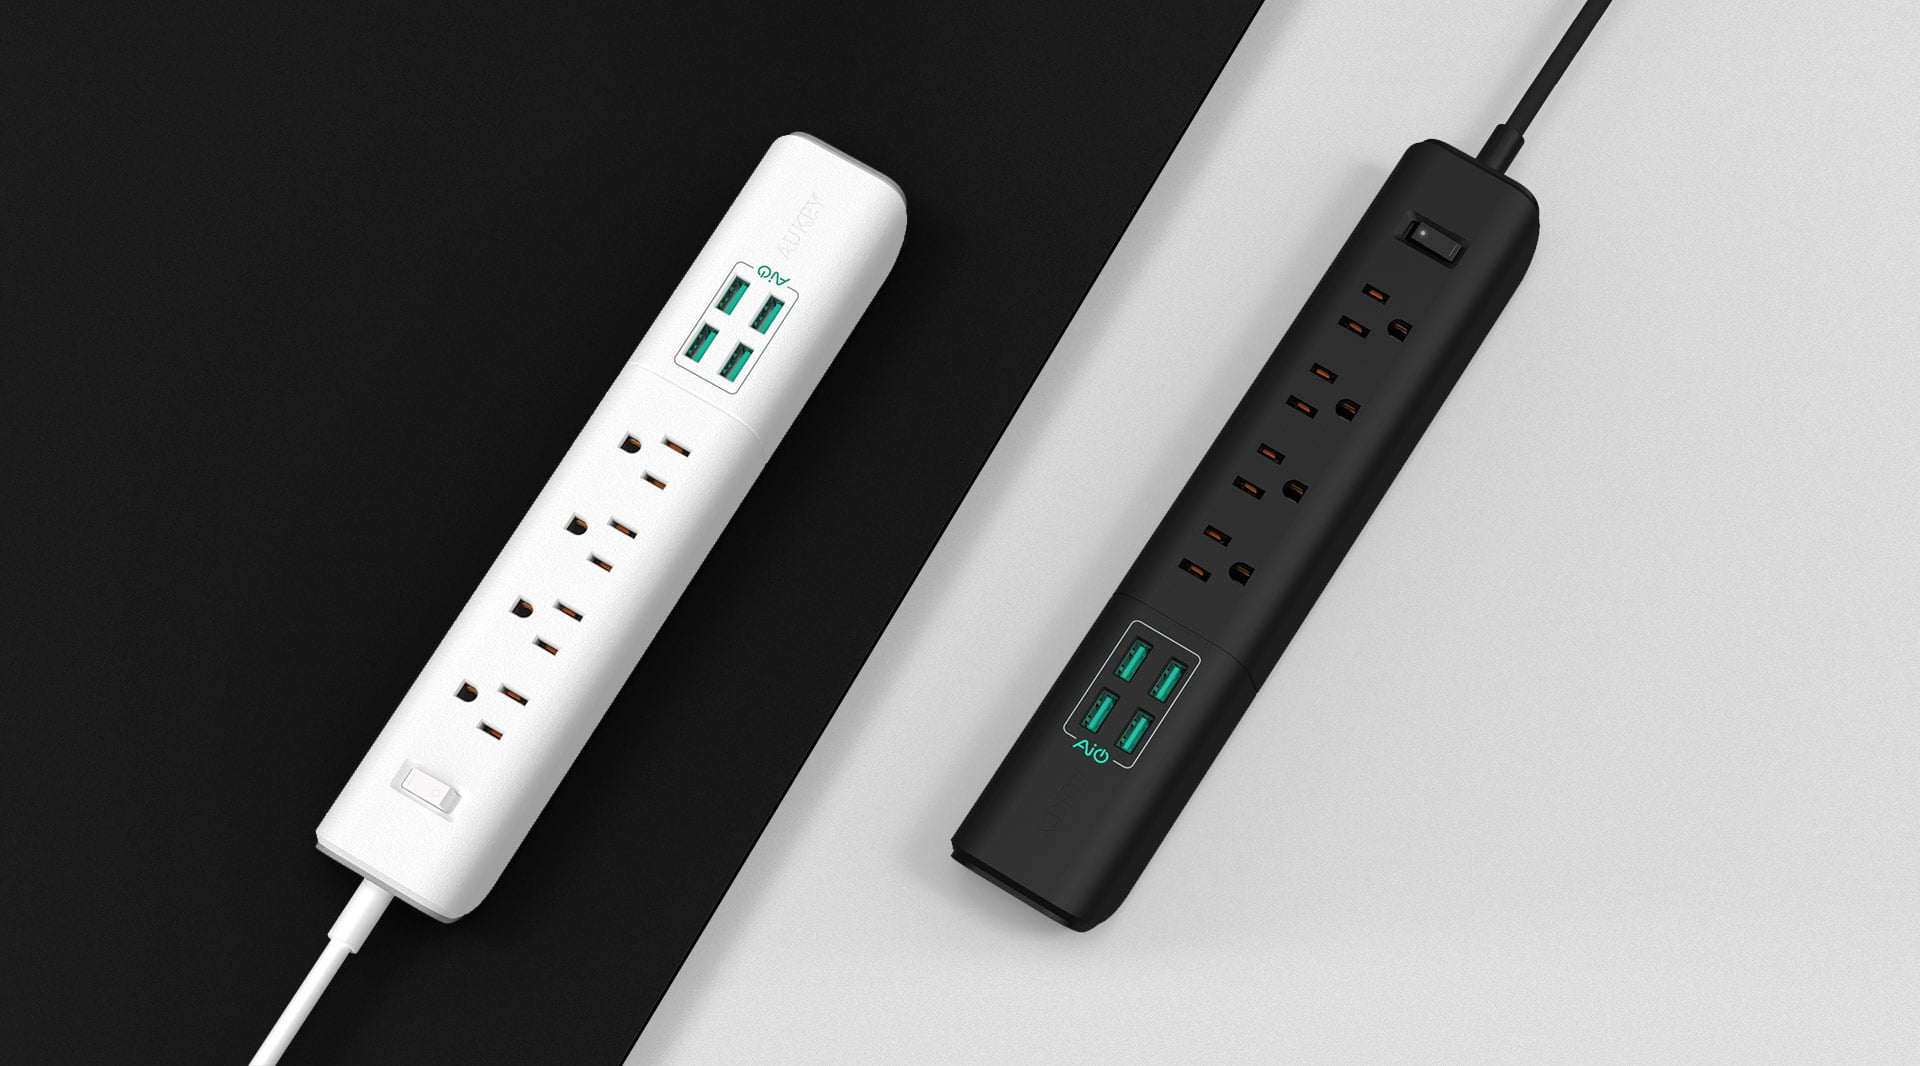 Aukey PA-S8 Power Strip with 4 USB Ports and 4 Outlets